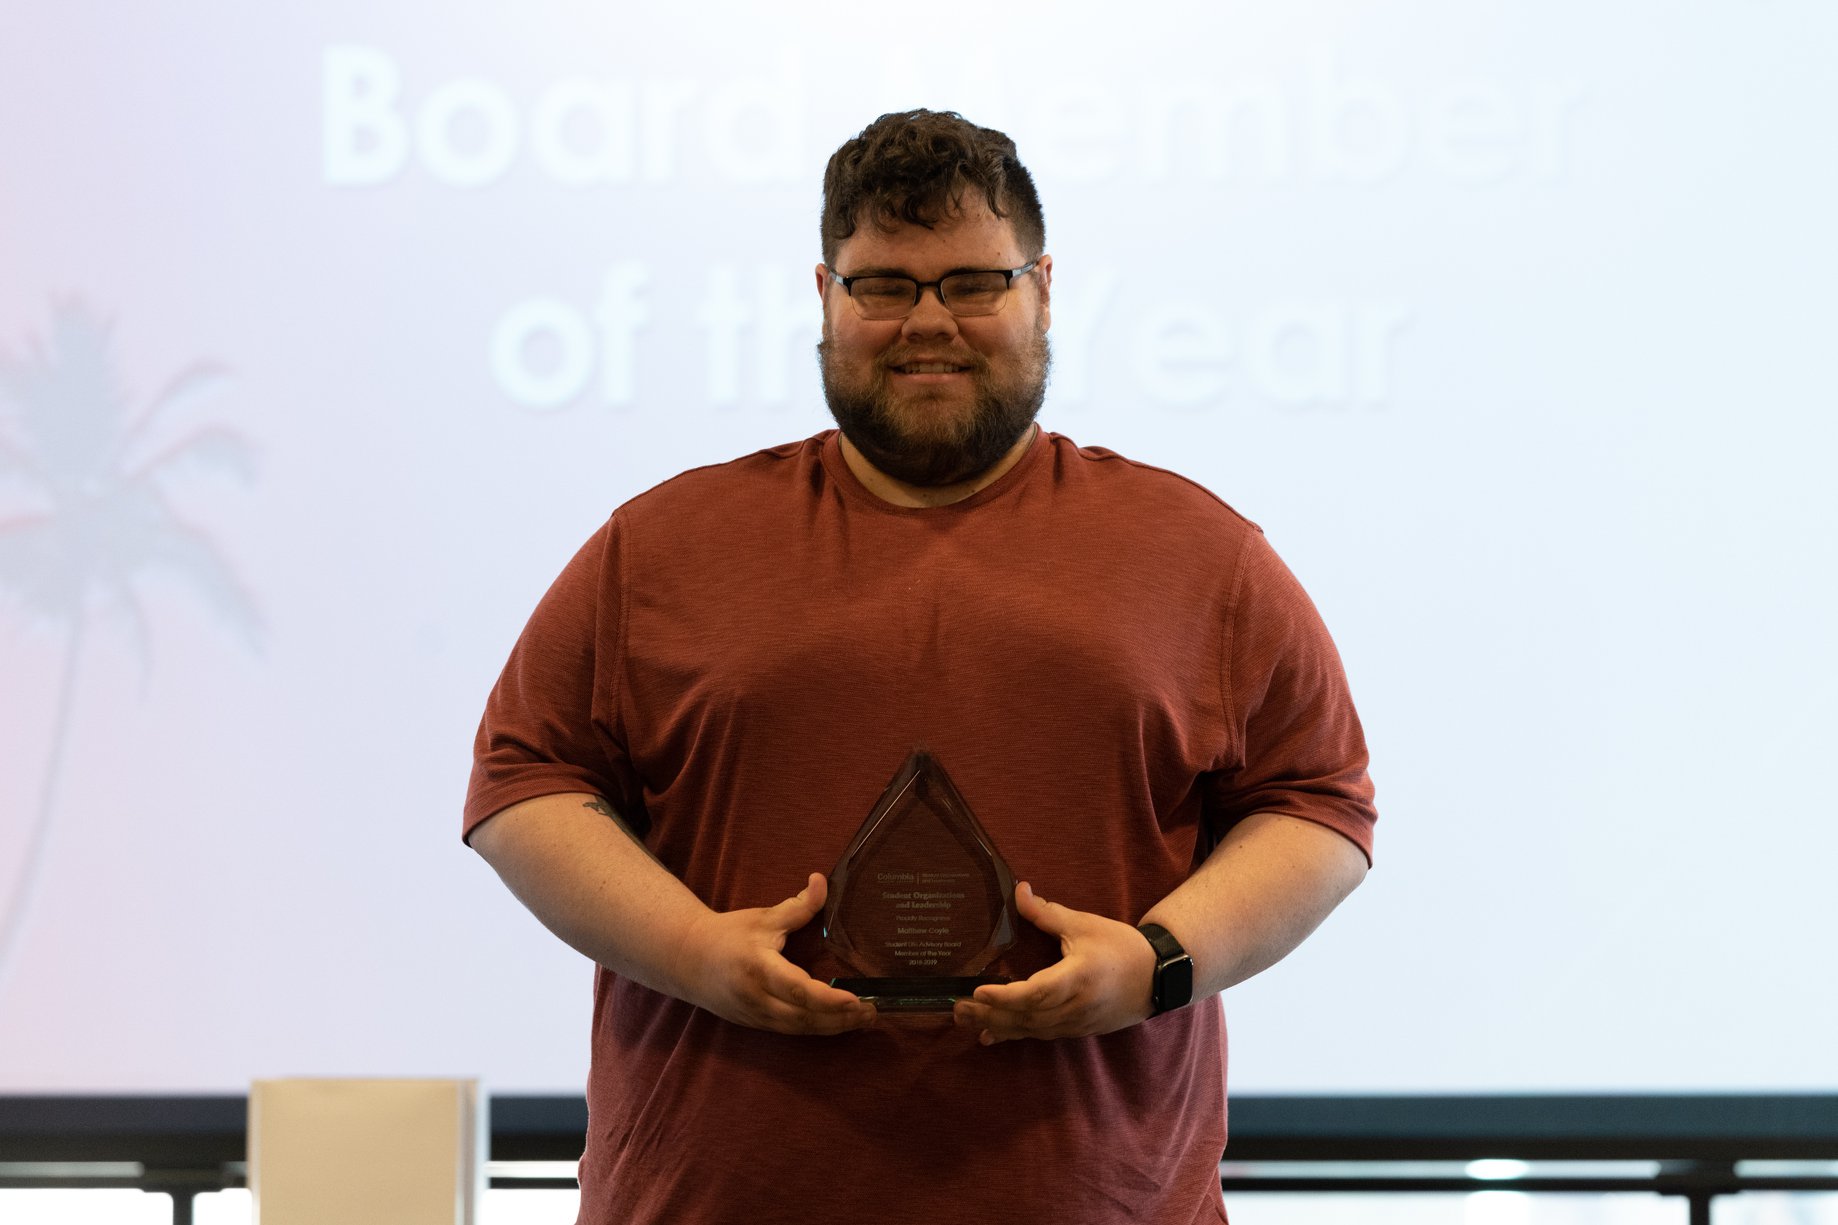 2018-19 SLAB Student of the Year